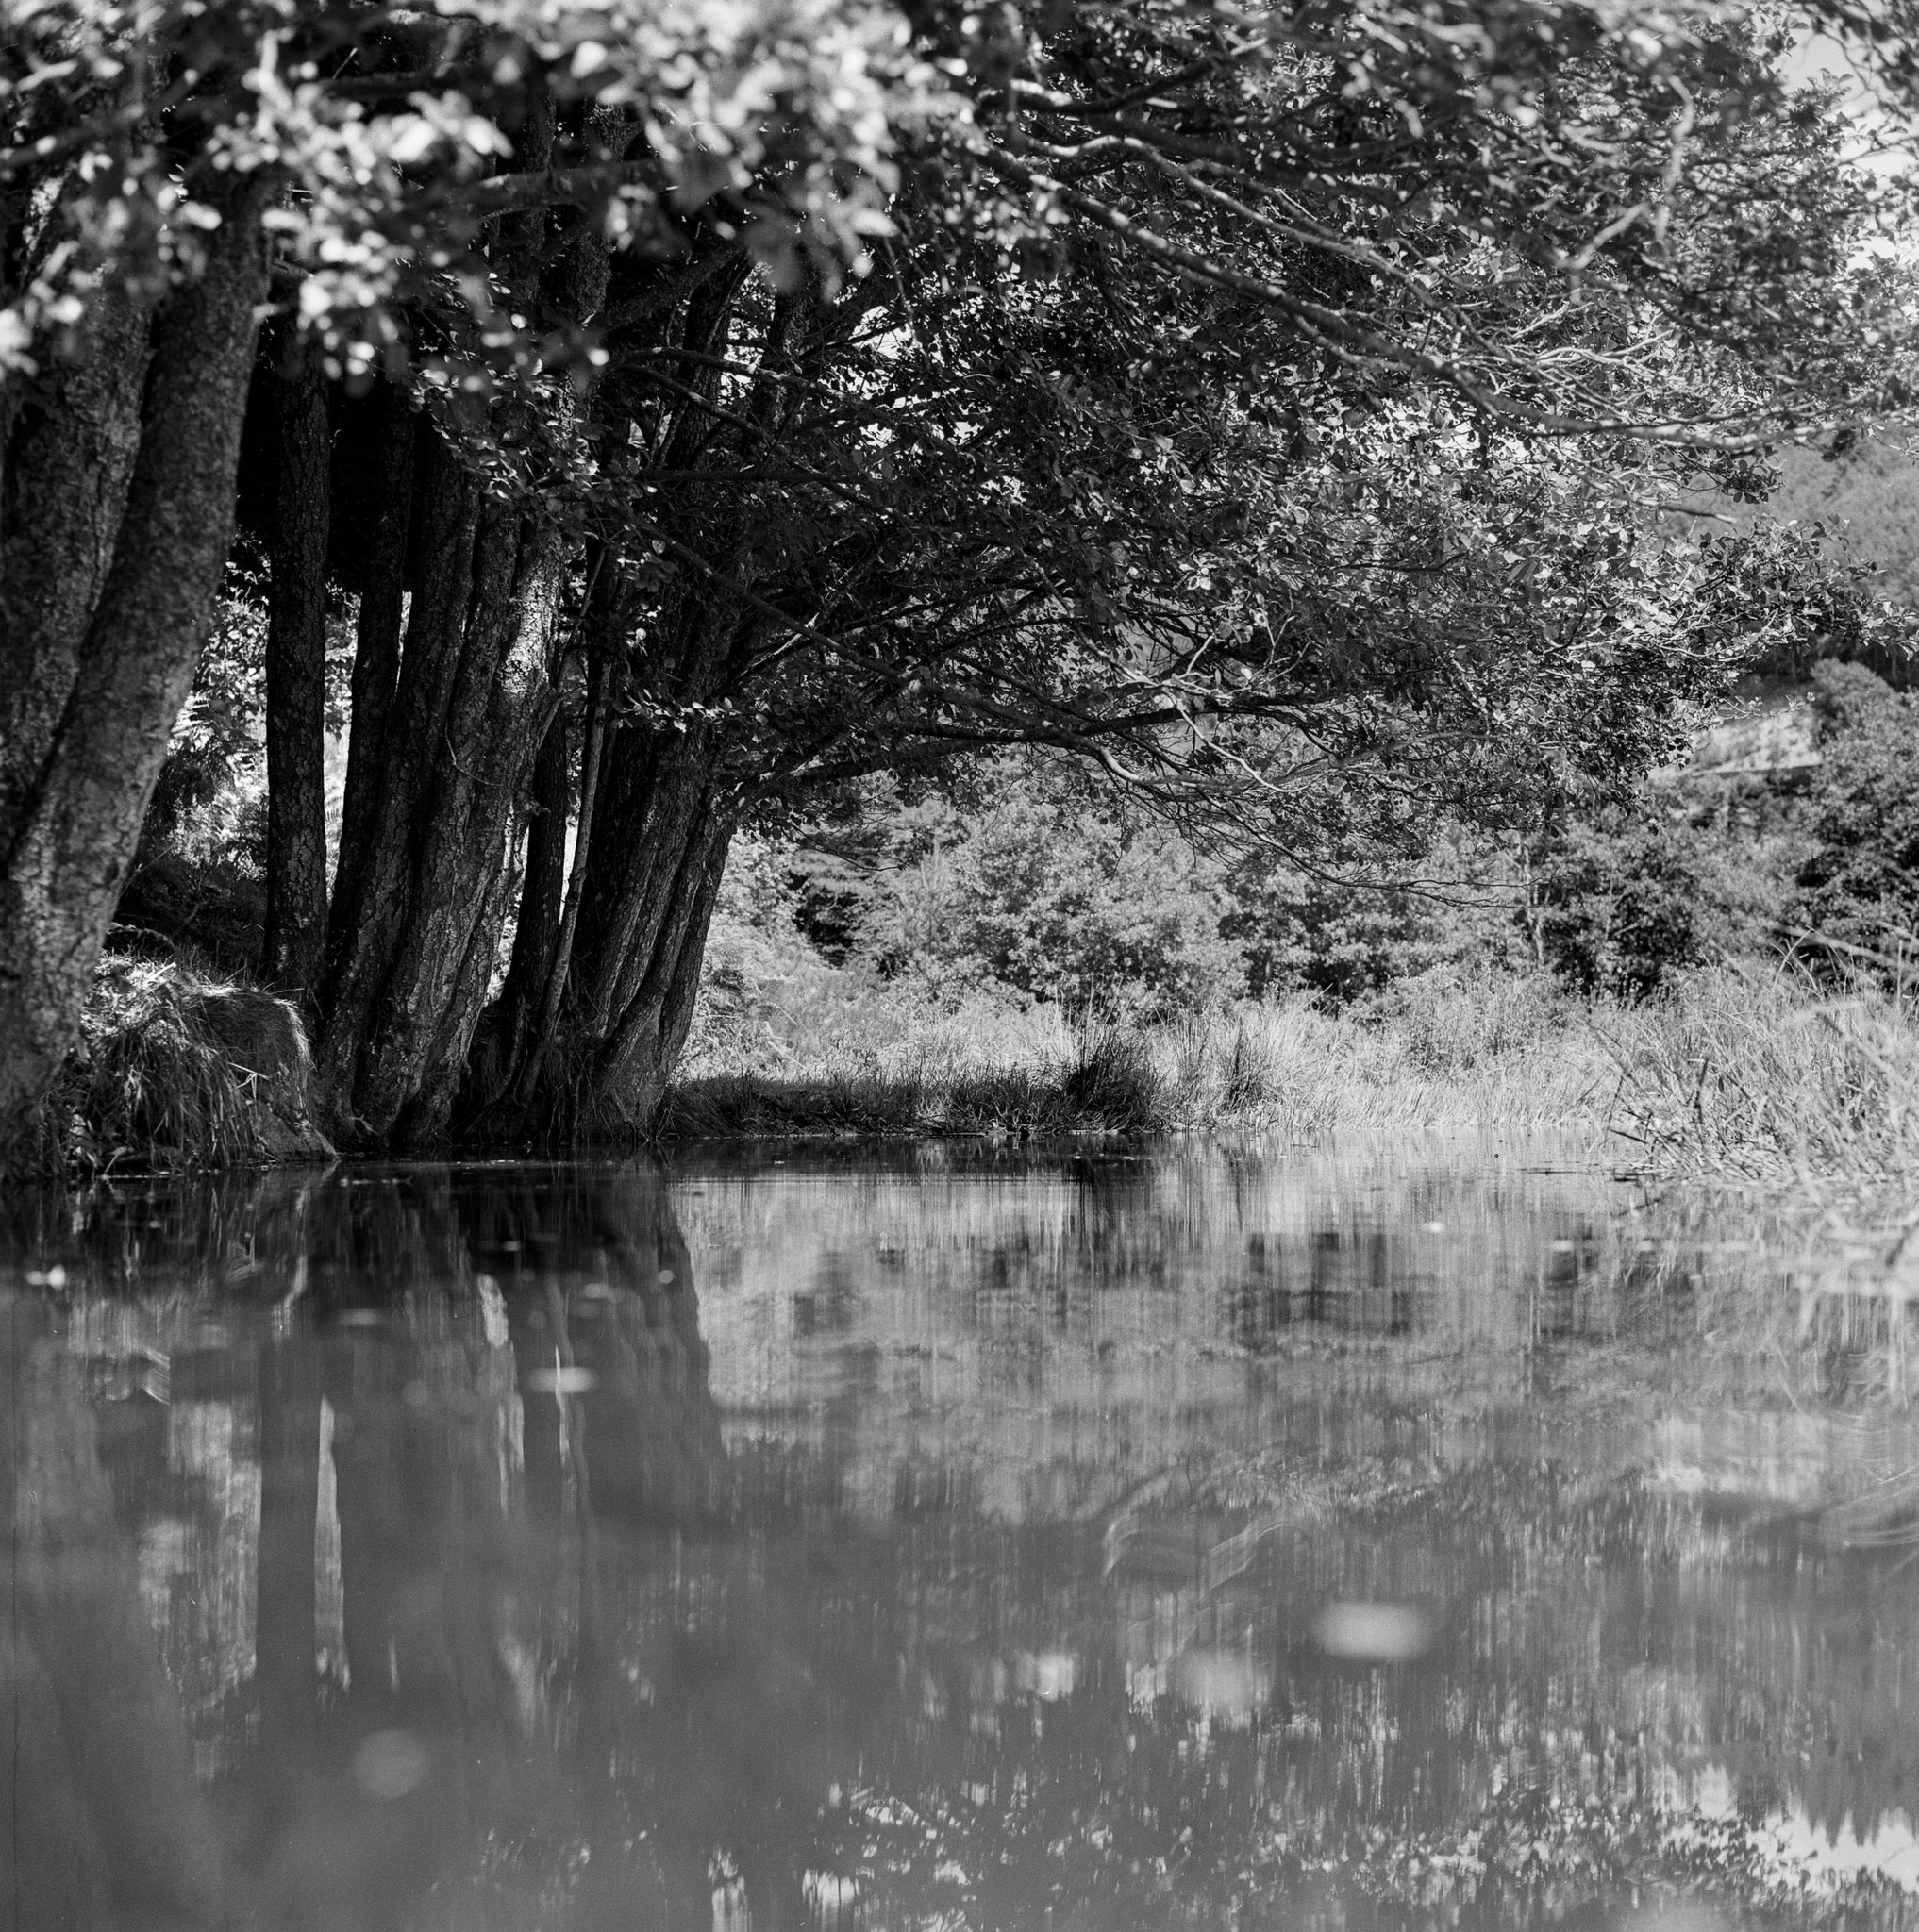 Black and white photograph of a tree and landscape reflected in the water